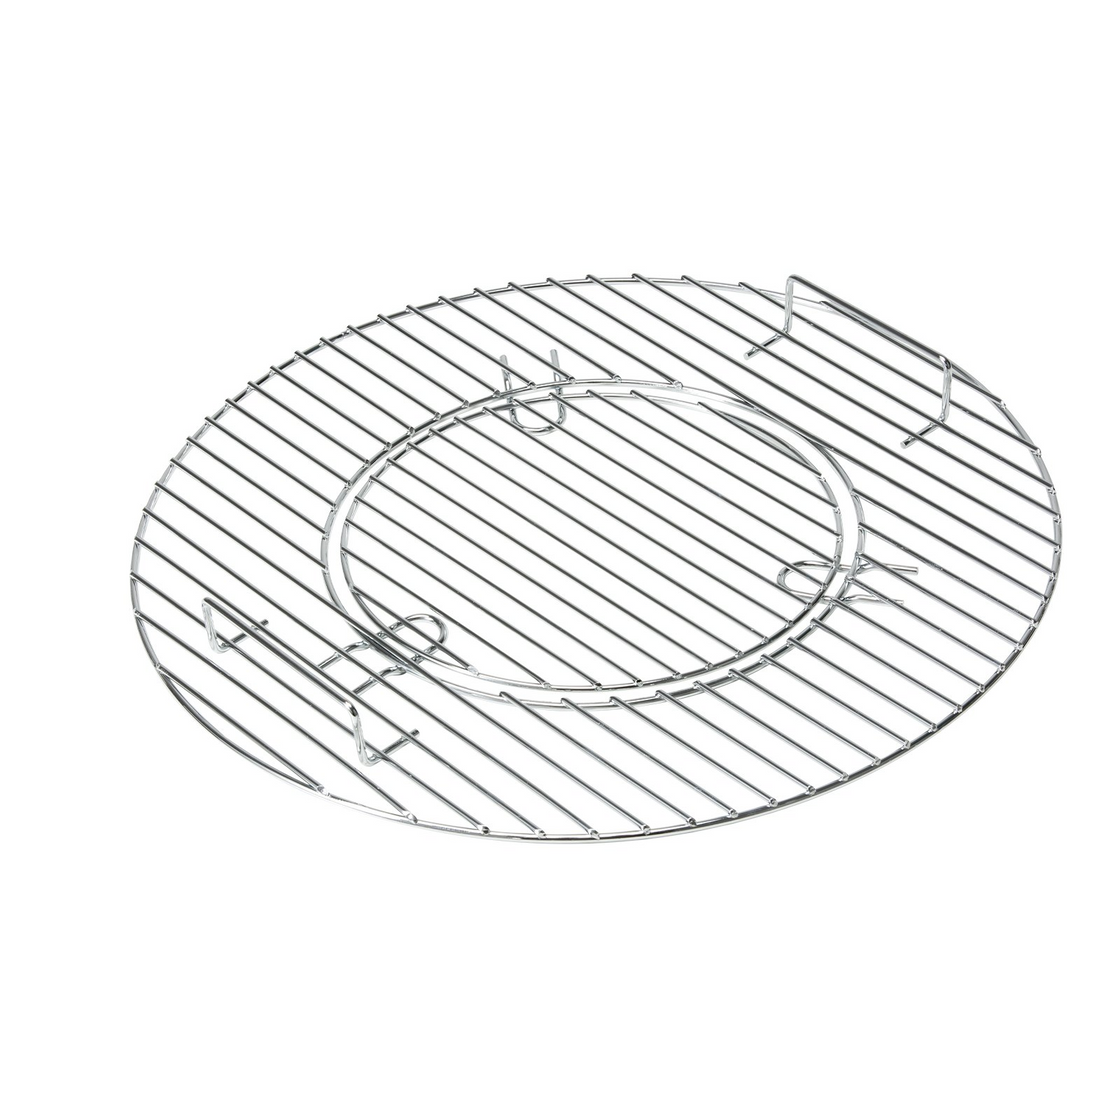 VEVOR 21 Inch Cooking Grate for Kettle Grill - Round Replacement Charcoal Grates for Outdoor Cooking